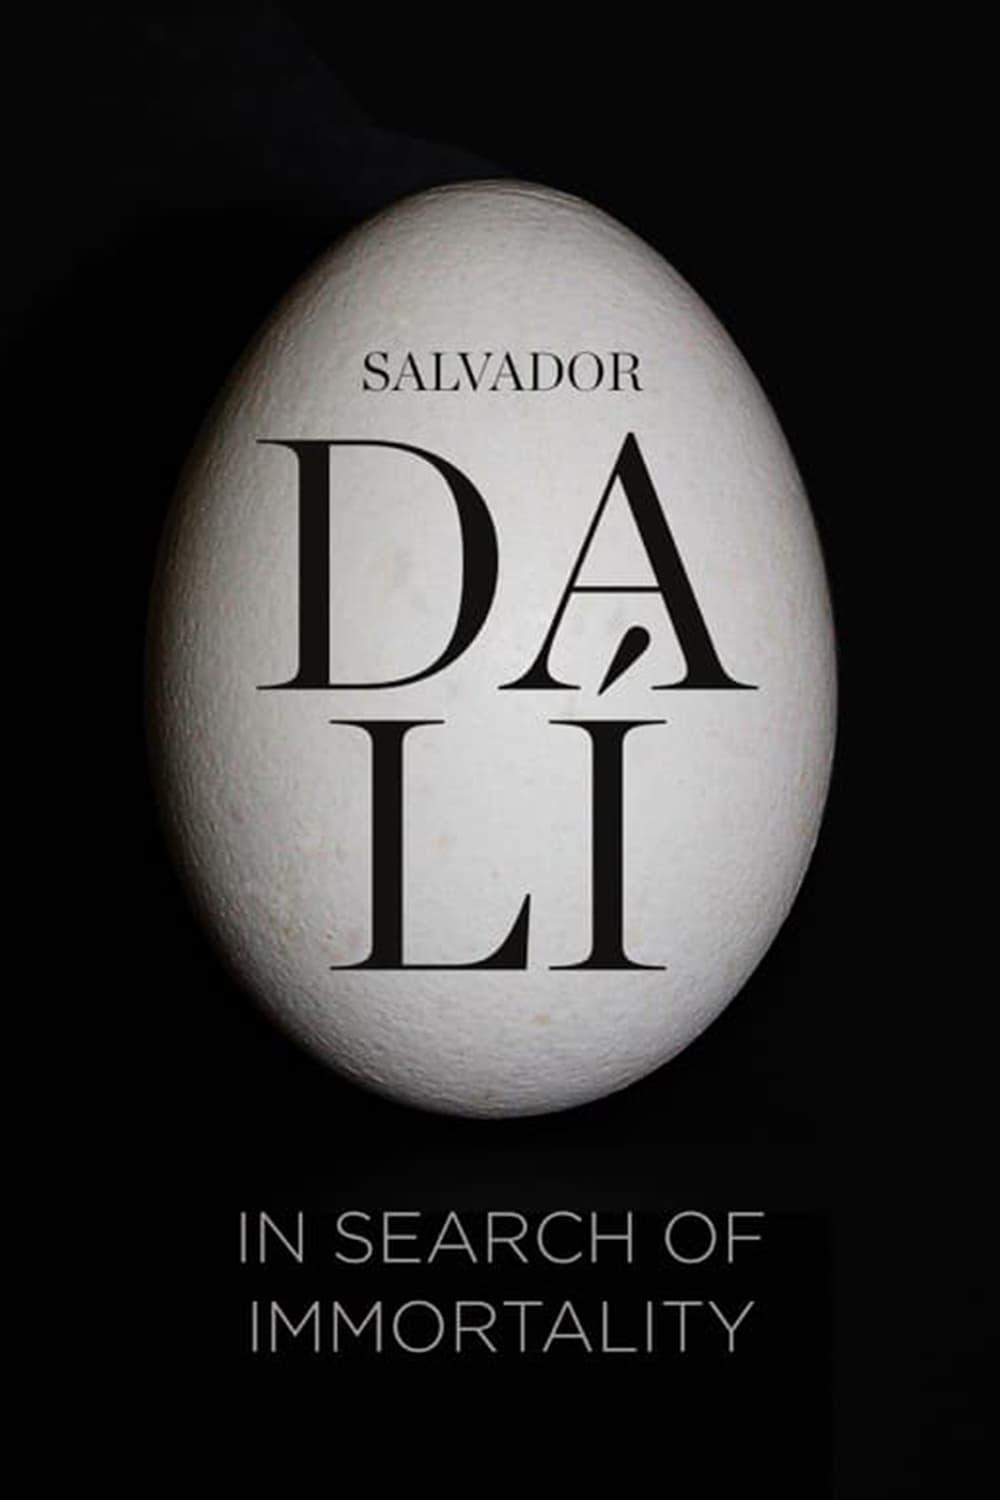 Salvador Dalí: In Search of Immortality poster